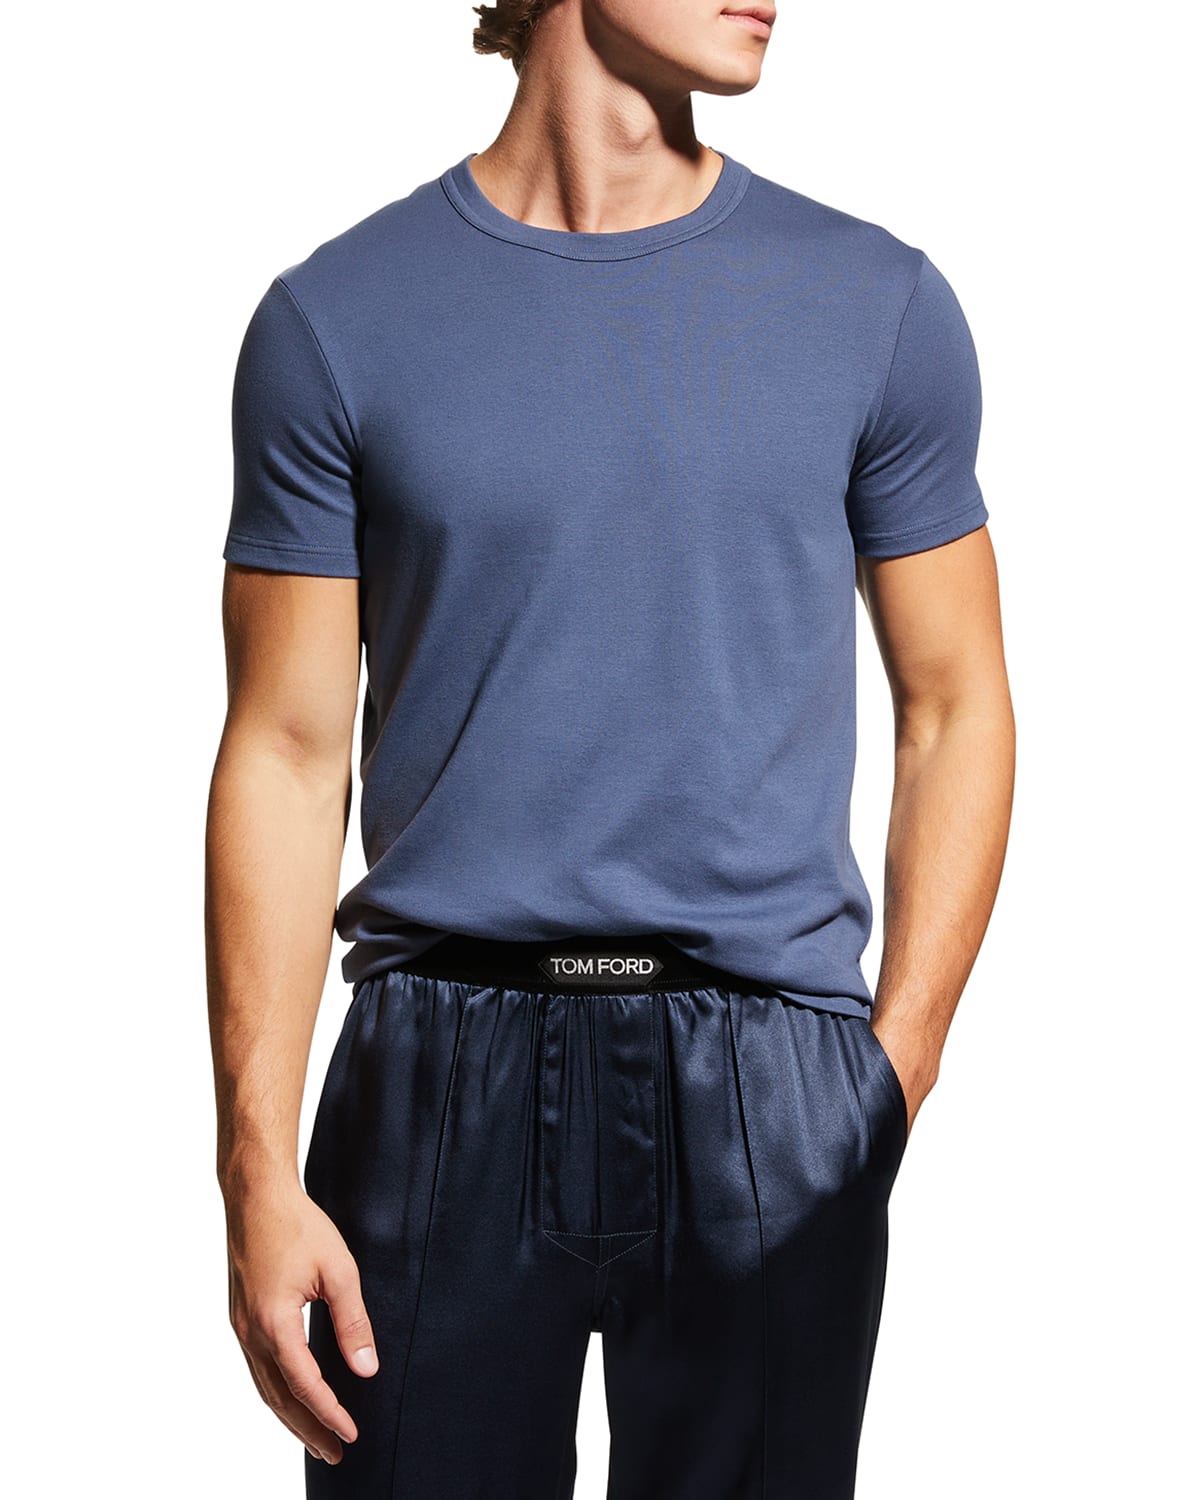 TOM FORD Men's Solid Stretch Jersey T-Shirt